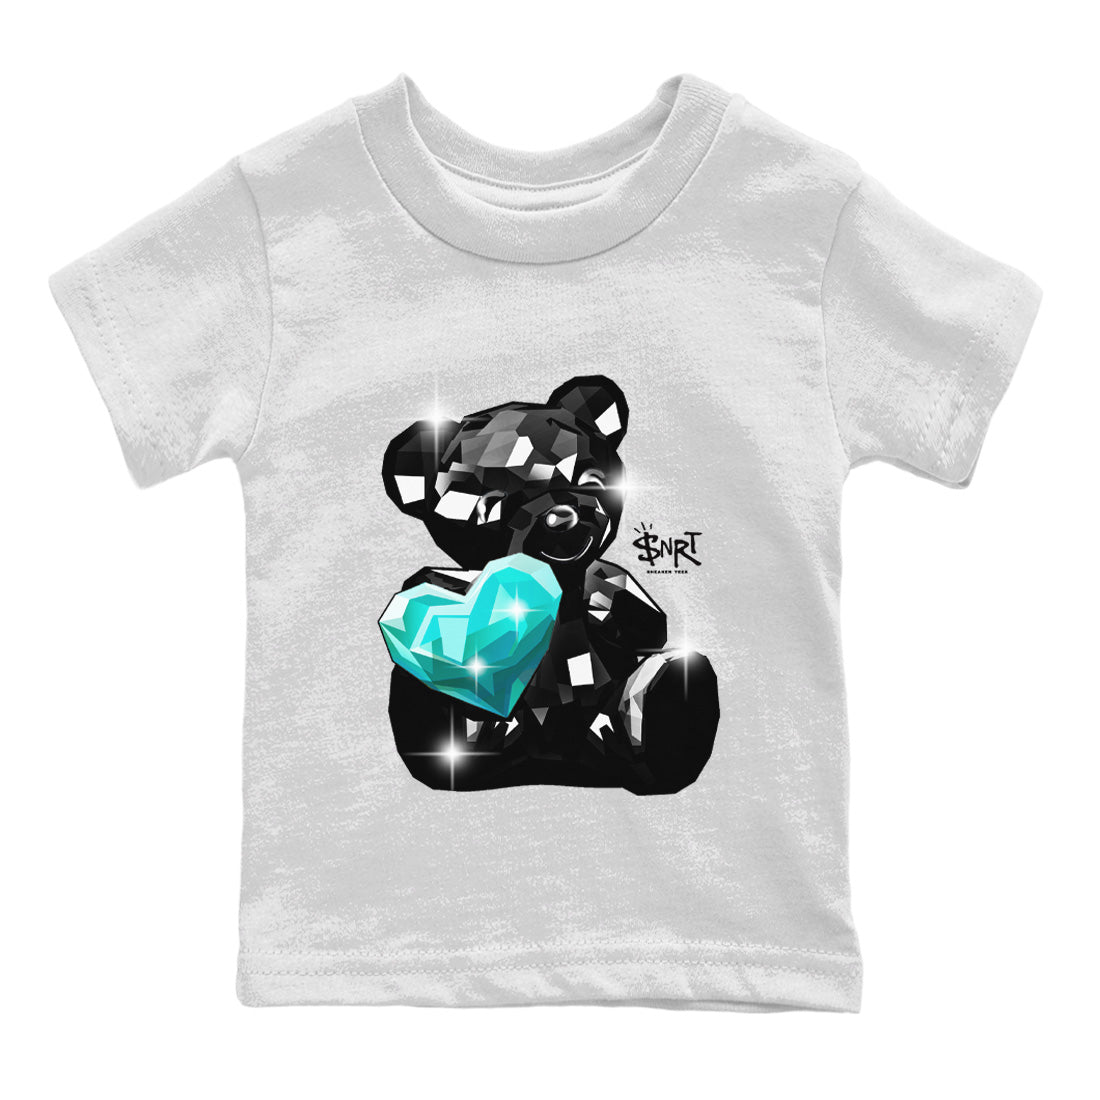 Air Force 1 Tiffany Bear Germs Baby and Kids Sneaker Tees Air Force 1 Low x Tiffany Kids Sneaker Tees Size Chart